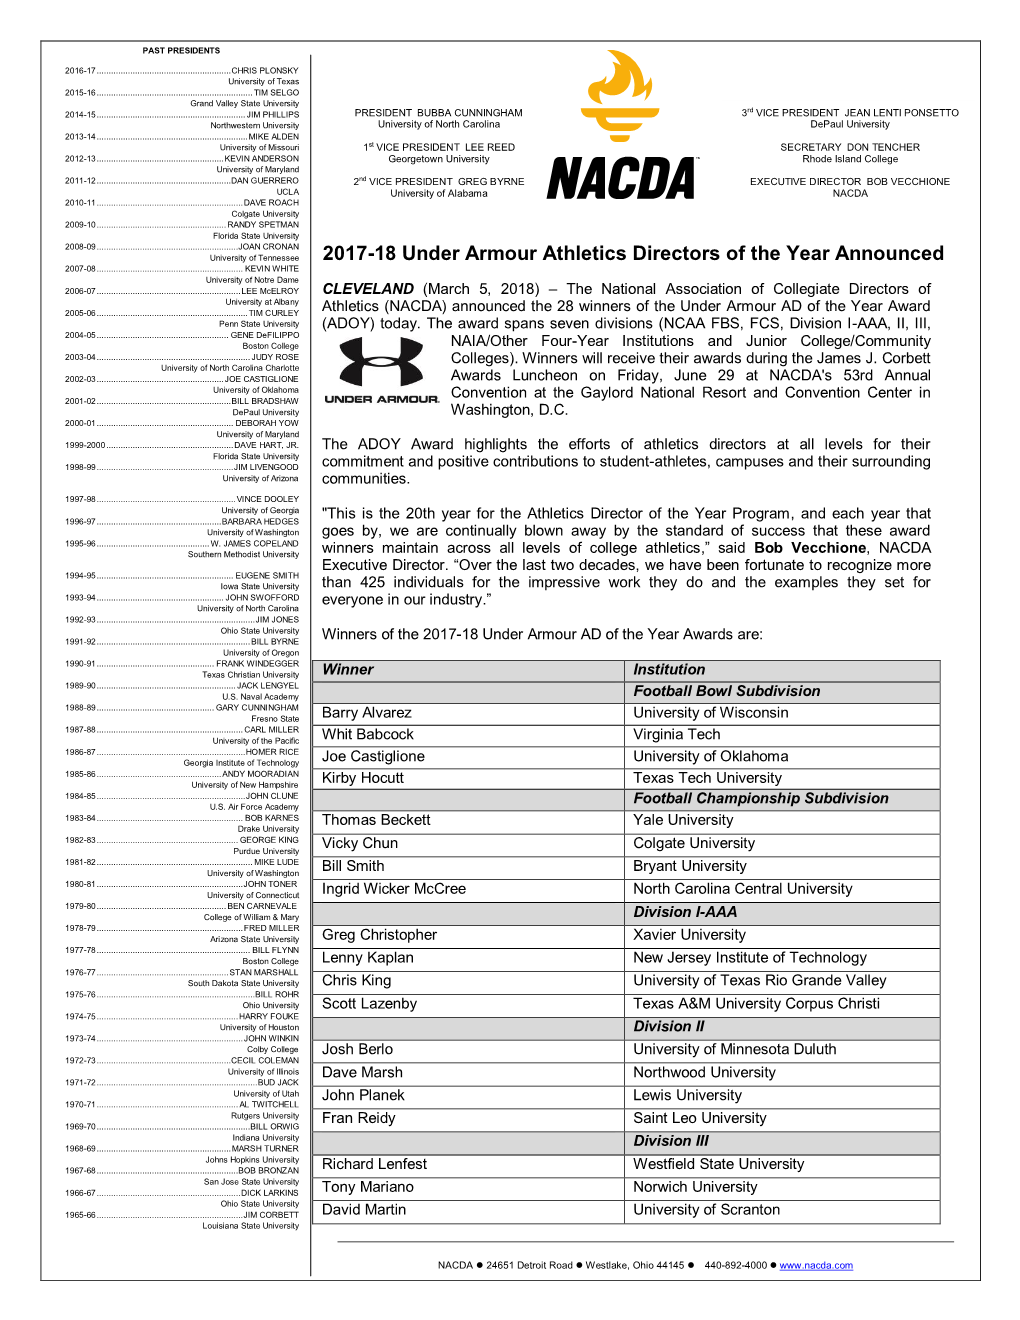 2017-18 Under Armour Athletics Directors of the Year Announced 2007-08